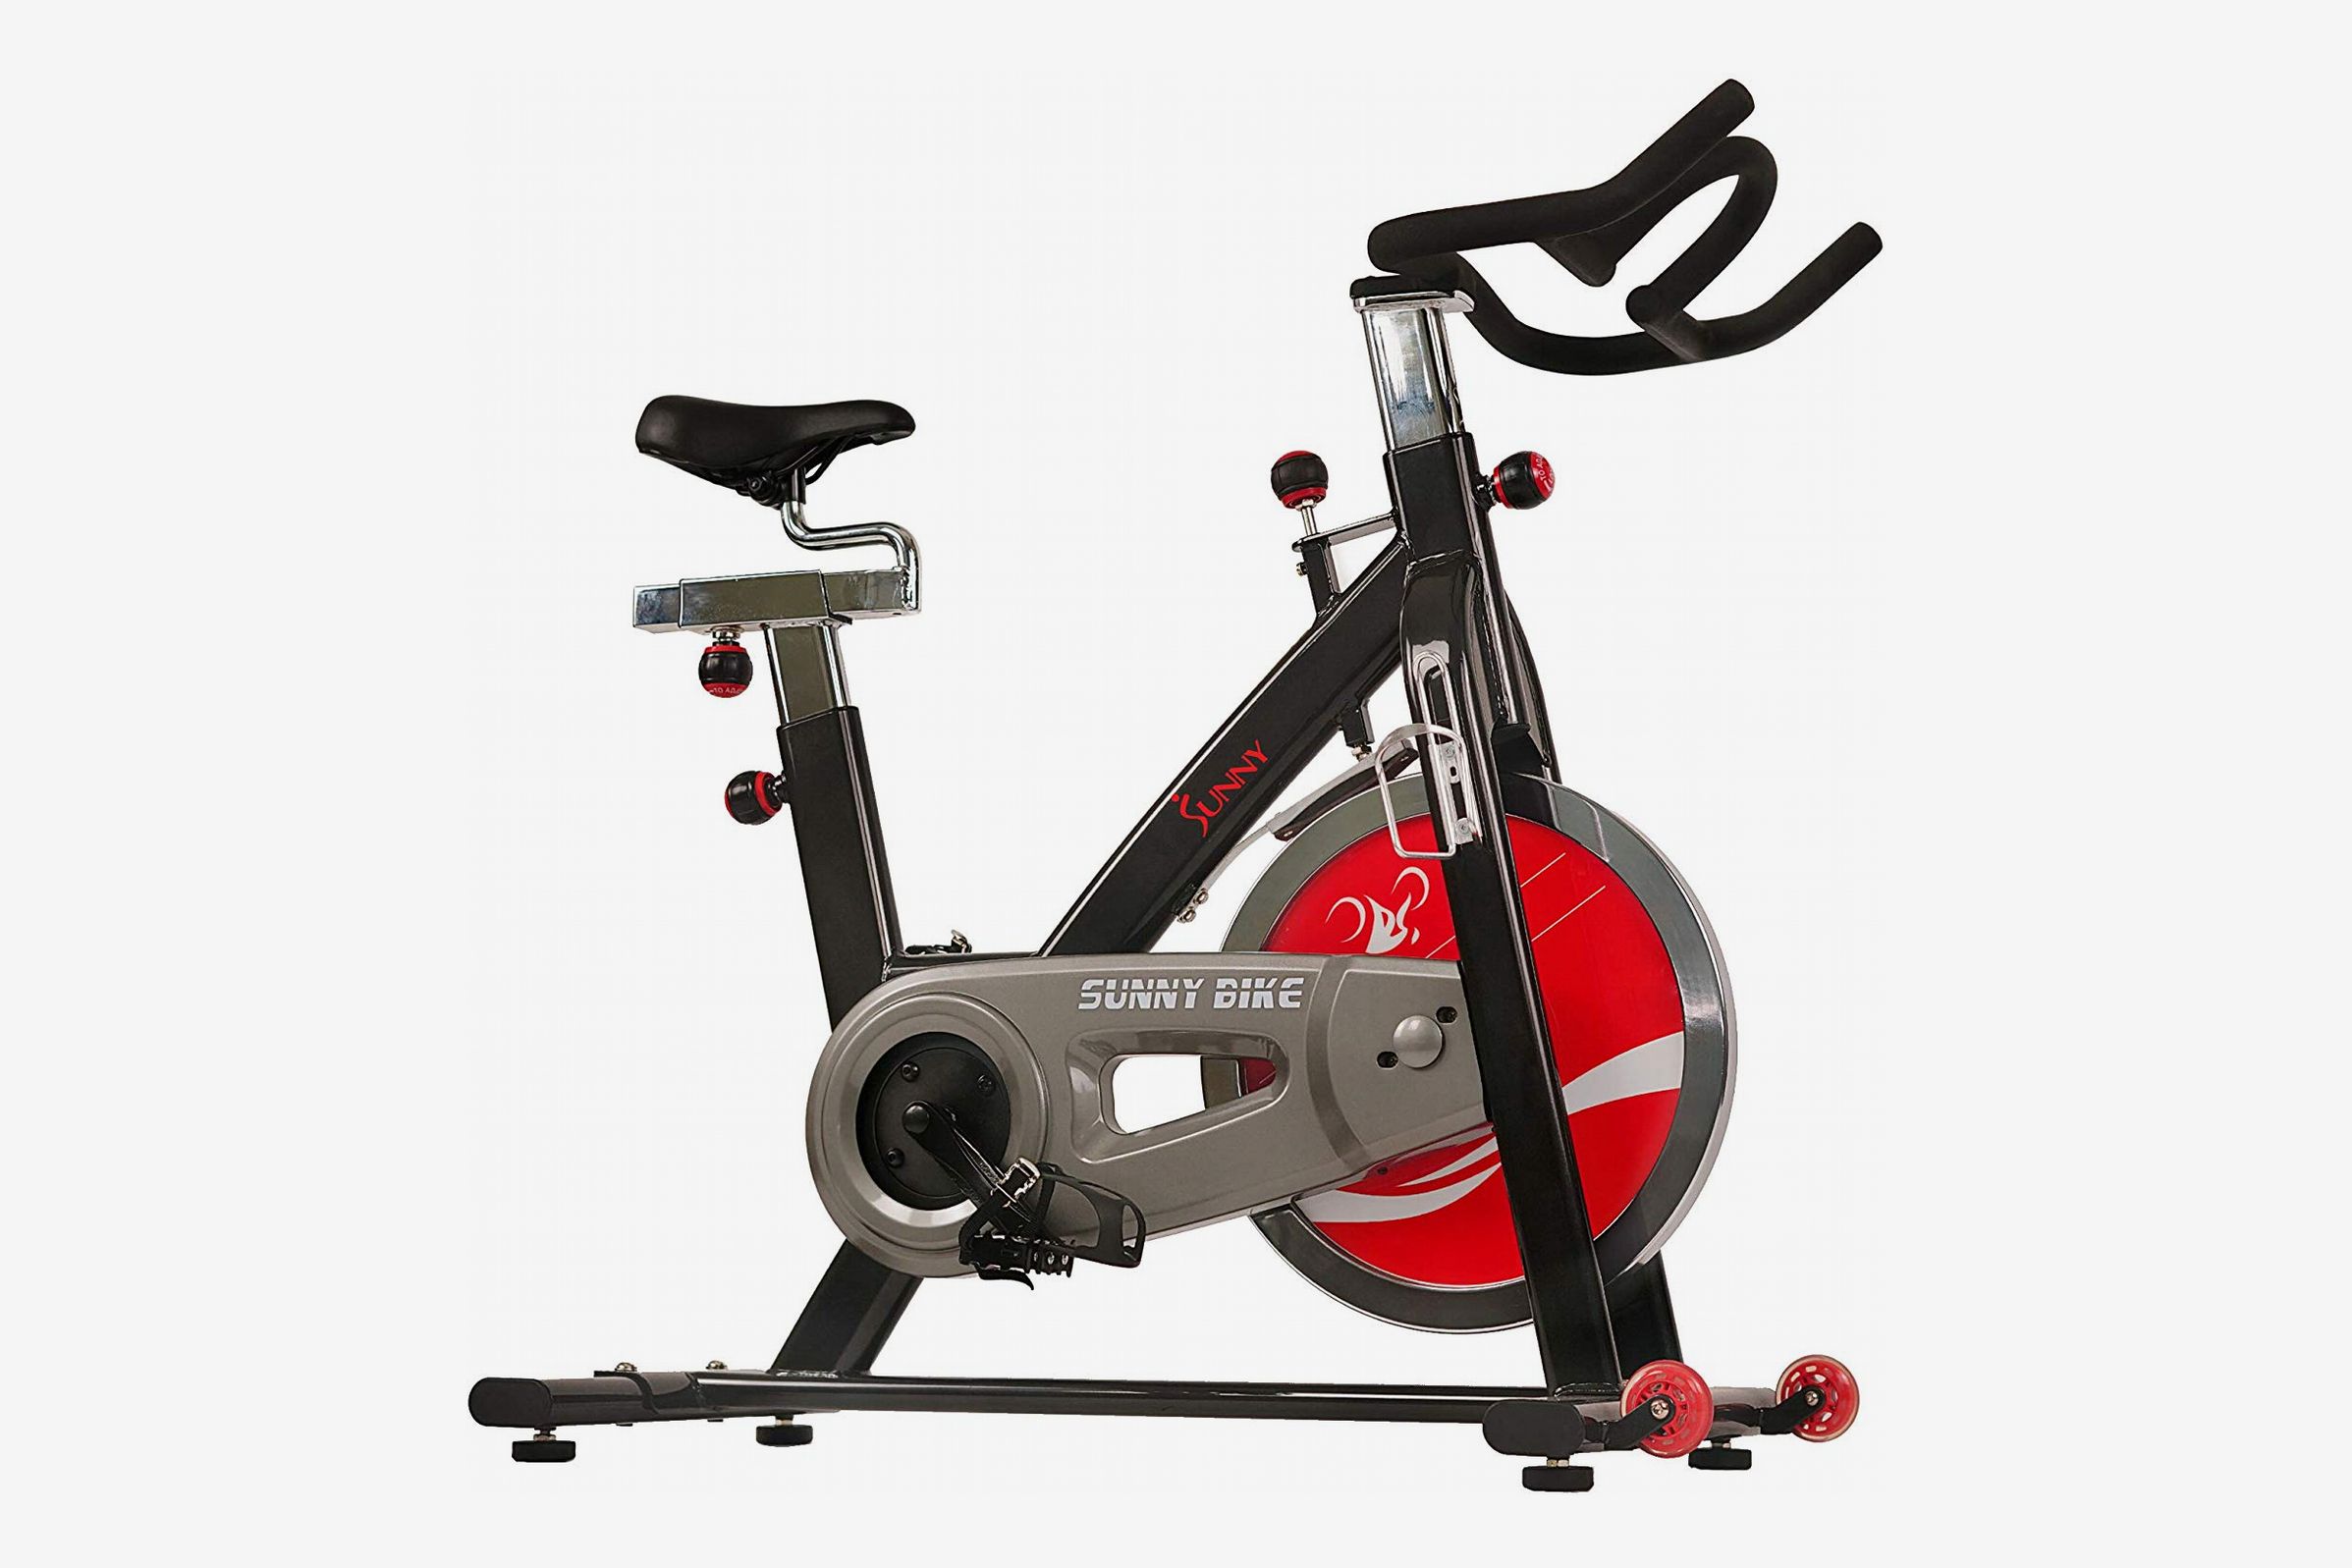 Indoor Cycle Bike Exercise Bike Stationary Bicycle Home Gym Cardio Trainer Pedal